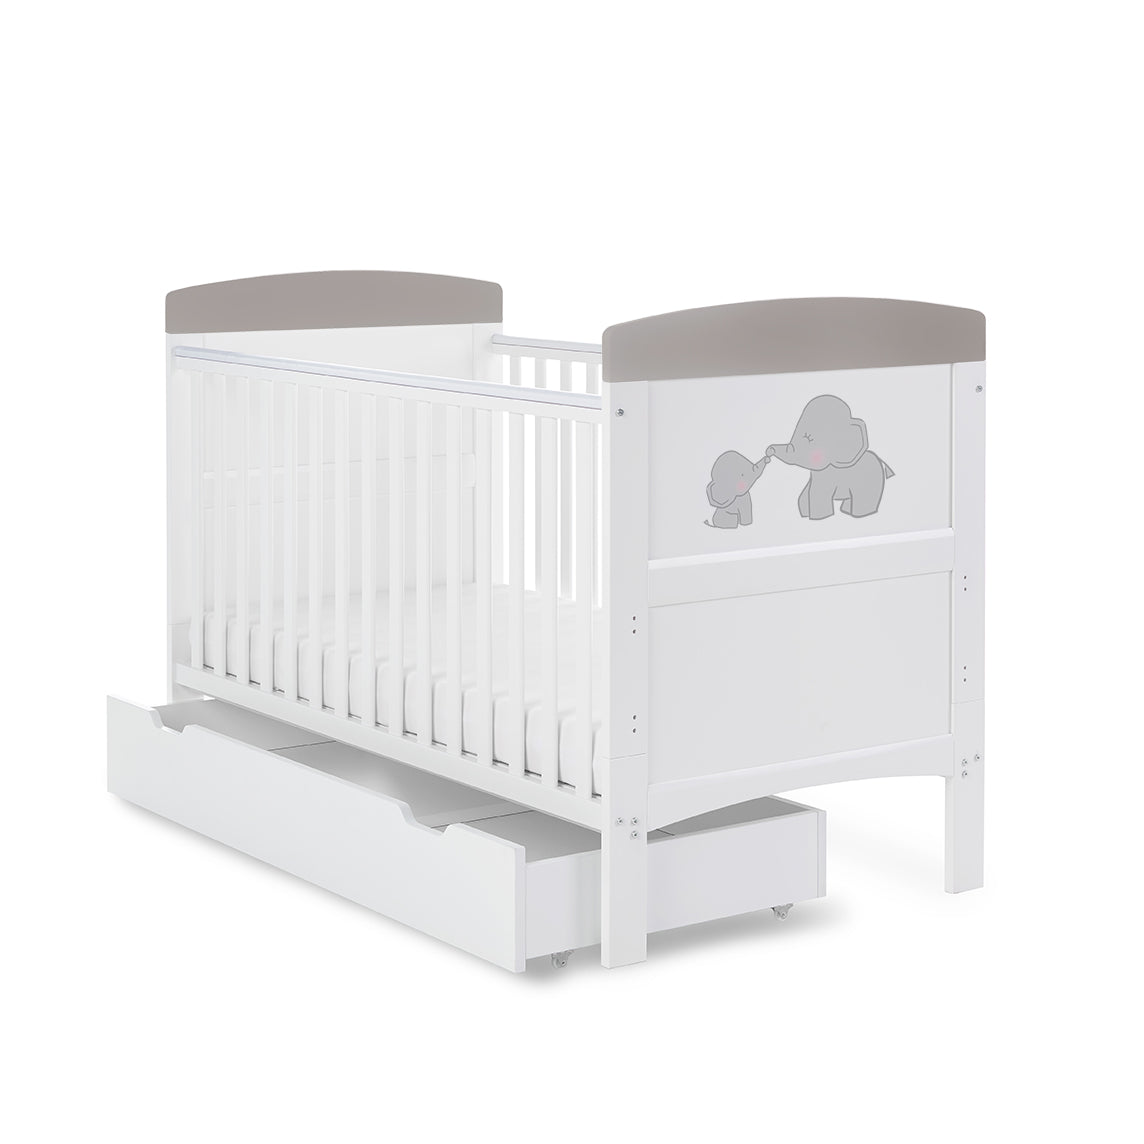 Obaby Grace Inspire Cot Bed & Underdrawer – Me & Mini Me Elephants – Grey -  | For Your Little One